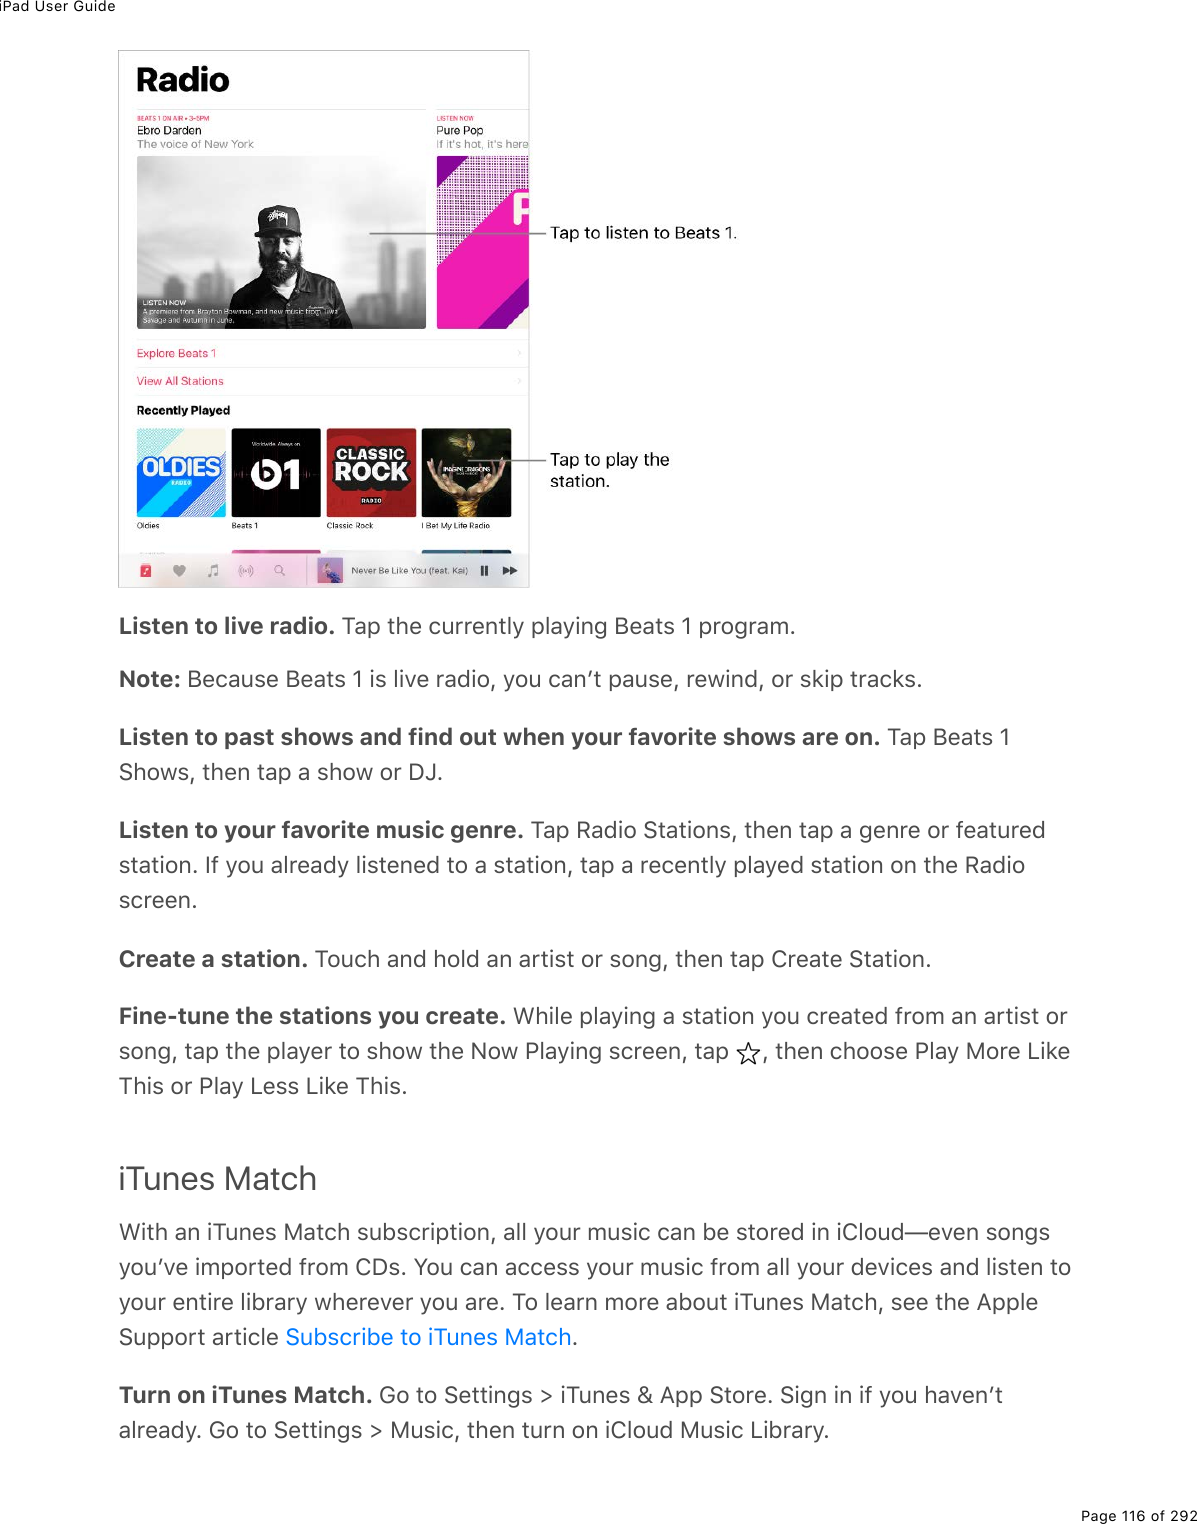 iPad User GuidePage 116 of 292Listen to live radio. Tap the currently playing Beats 1 program.Note: Because Beats 1 is live radio, you canʼt pause, rewind, or skip tracks.Listen to past shows and find out when your favorite shows are on. Tap Beats 1Shows, then tap a show or DJ.Listen to your favorite music genre. Tap Radio Stations, then tap a genre or featuredstation. If you already listened to a station, tap a recently played station on the Radioscreen.Create a station. Touch and hold an artist or song, then tap Create Station.Fine-tune the stations you create. While playing a station you created from an artist orsong, tap the player to show the Now Playing screen, tap  , then choose Play More LikeThis or Play Less Like This.iTunes MatchWith an iTunes Match subscription, all your music can be stored in iCloud—even songsyouʼve imported from CDs. You can access your music from all your devices and listen toyour entire library wherever you are. To learn more about iTunes Match, see the AppleSupport article  .Turn on iTunes Match. Go to Settings &gt; iTunes &amp; App Store. Sign in if you havenʼtalready. Go to Settings &gt; Music, then turn on iCloud Music Library.Subscribe to iTunes Match